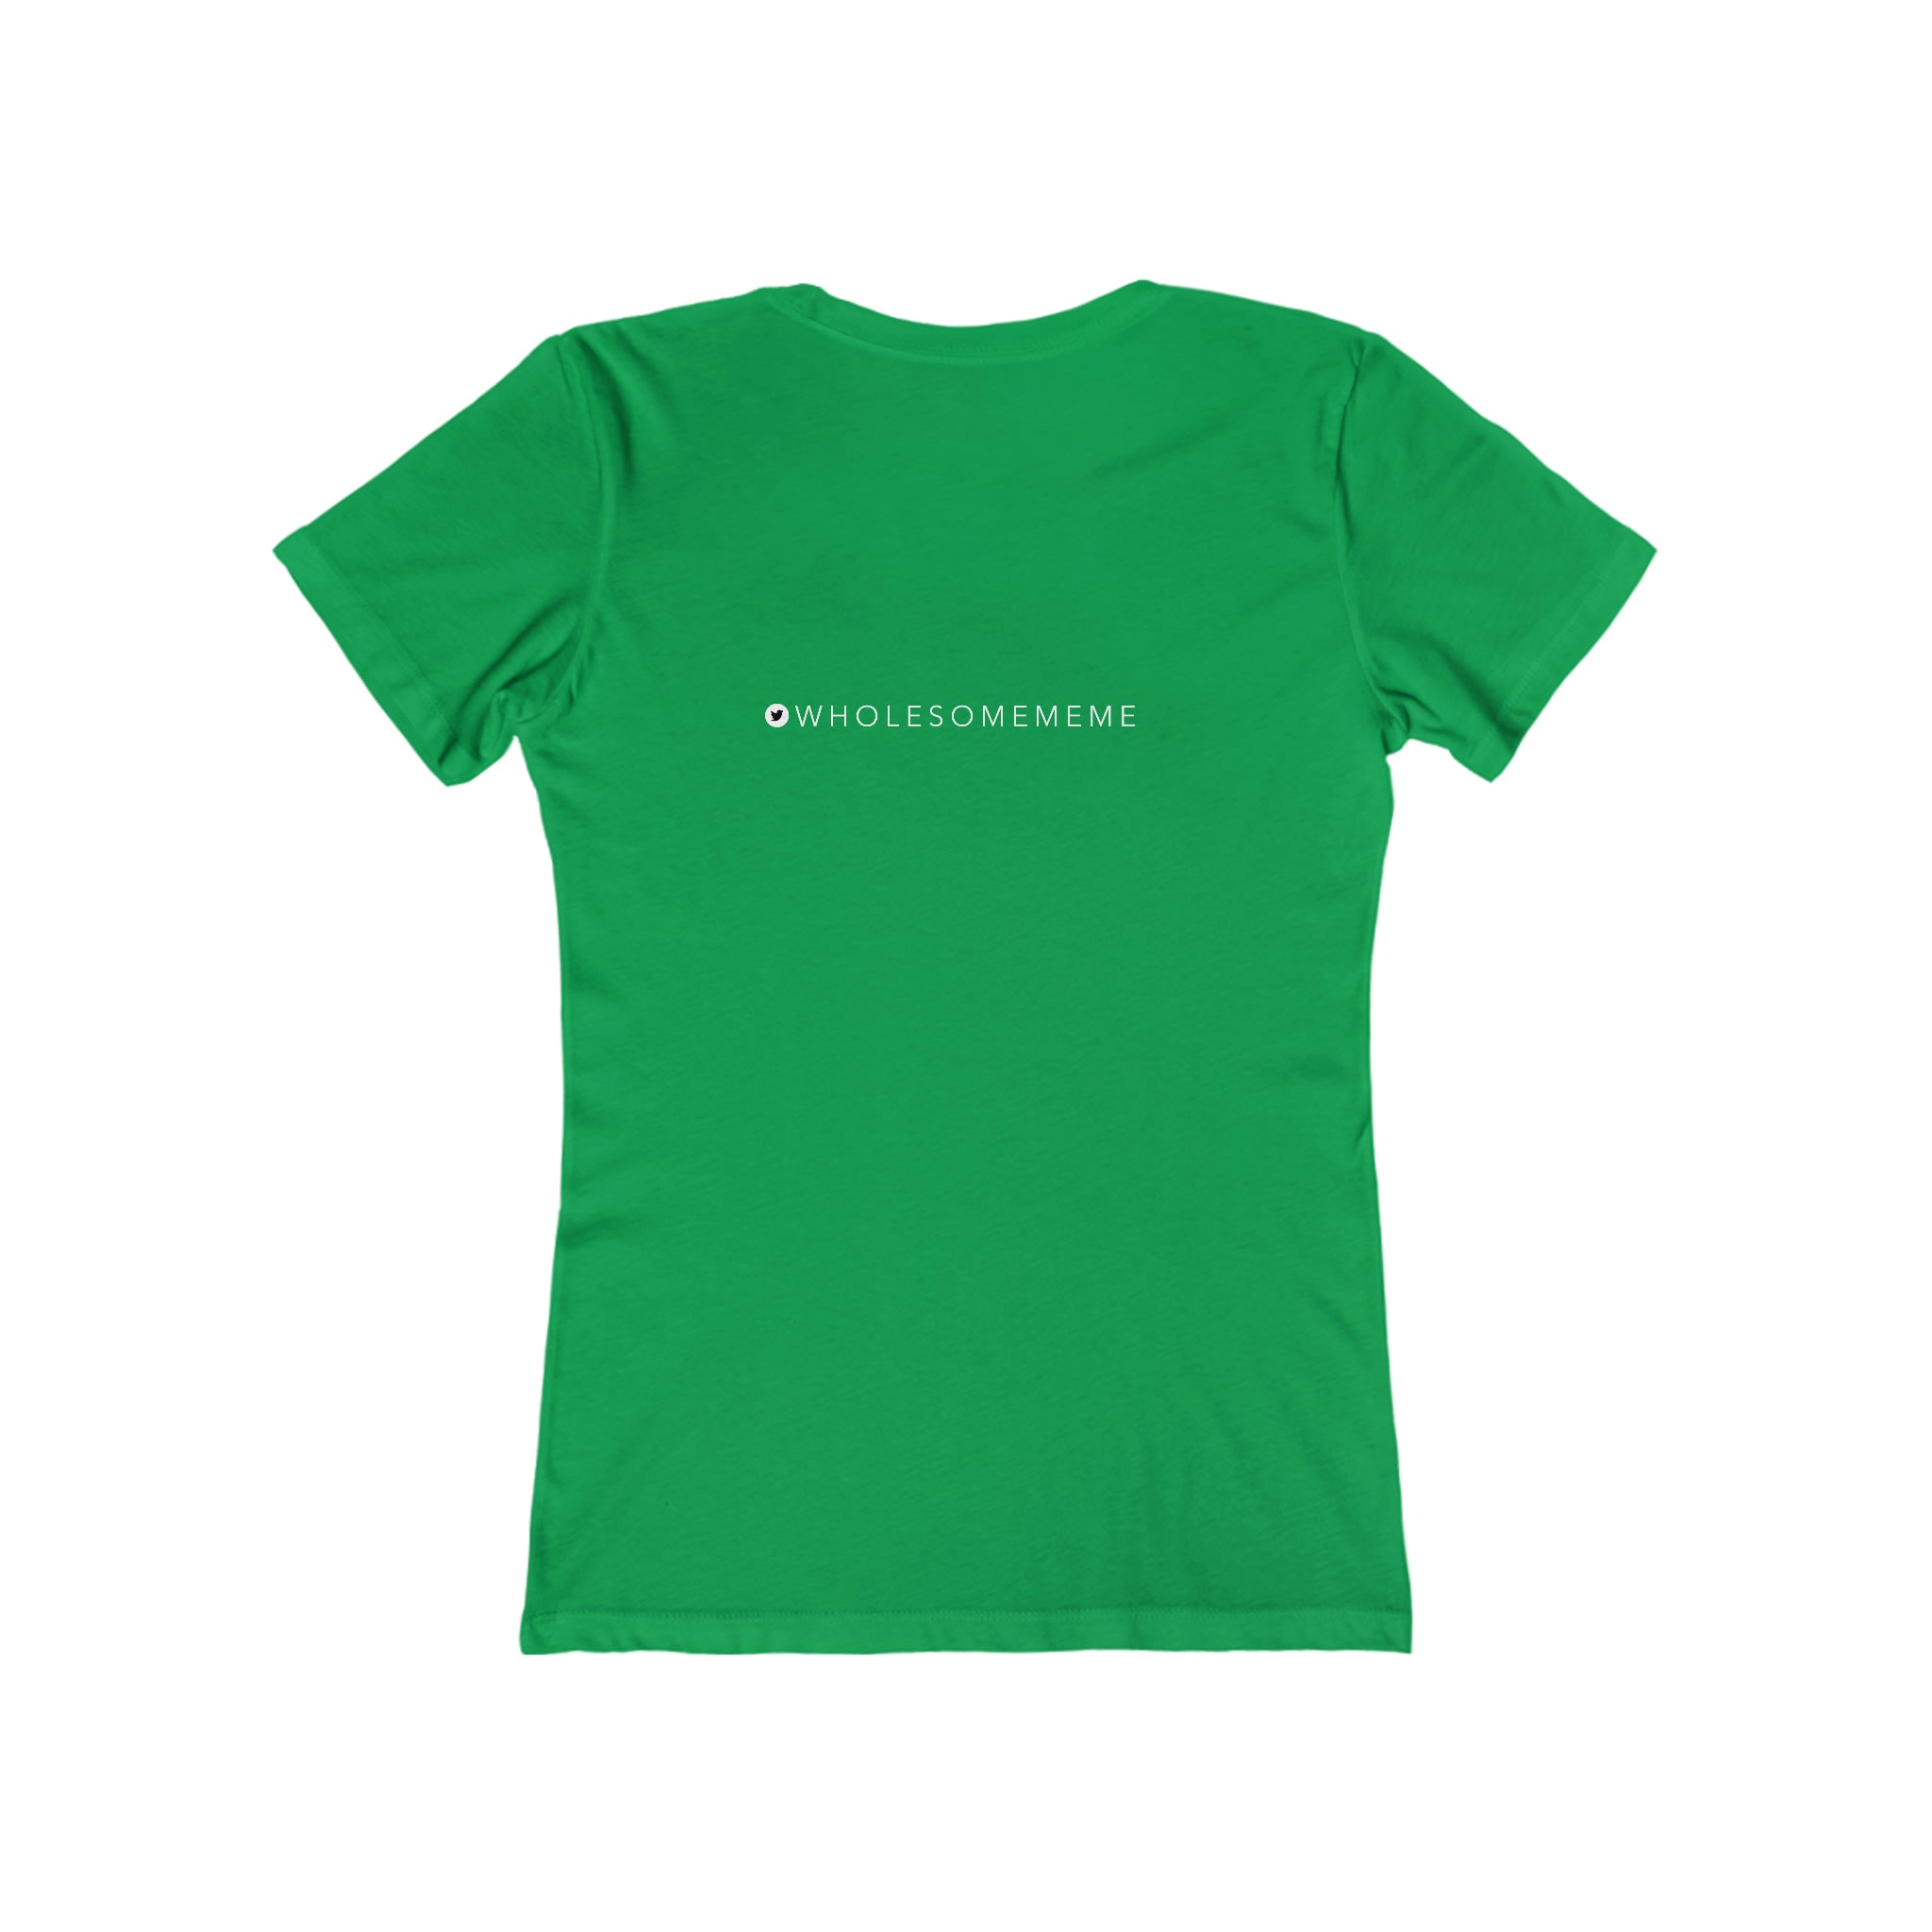 Limited Edition - Be Kind Wholesome : Women's 100% Cotton T-Shirt - Double Sided Shirt